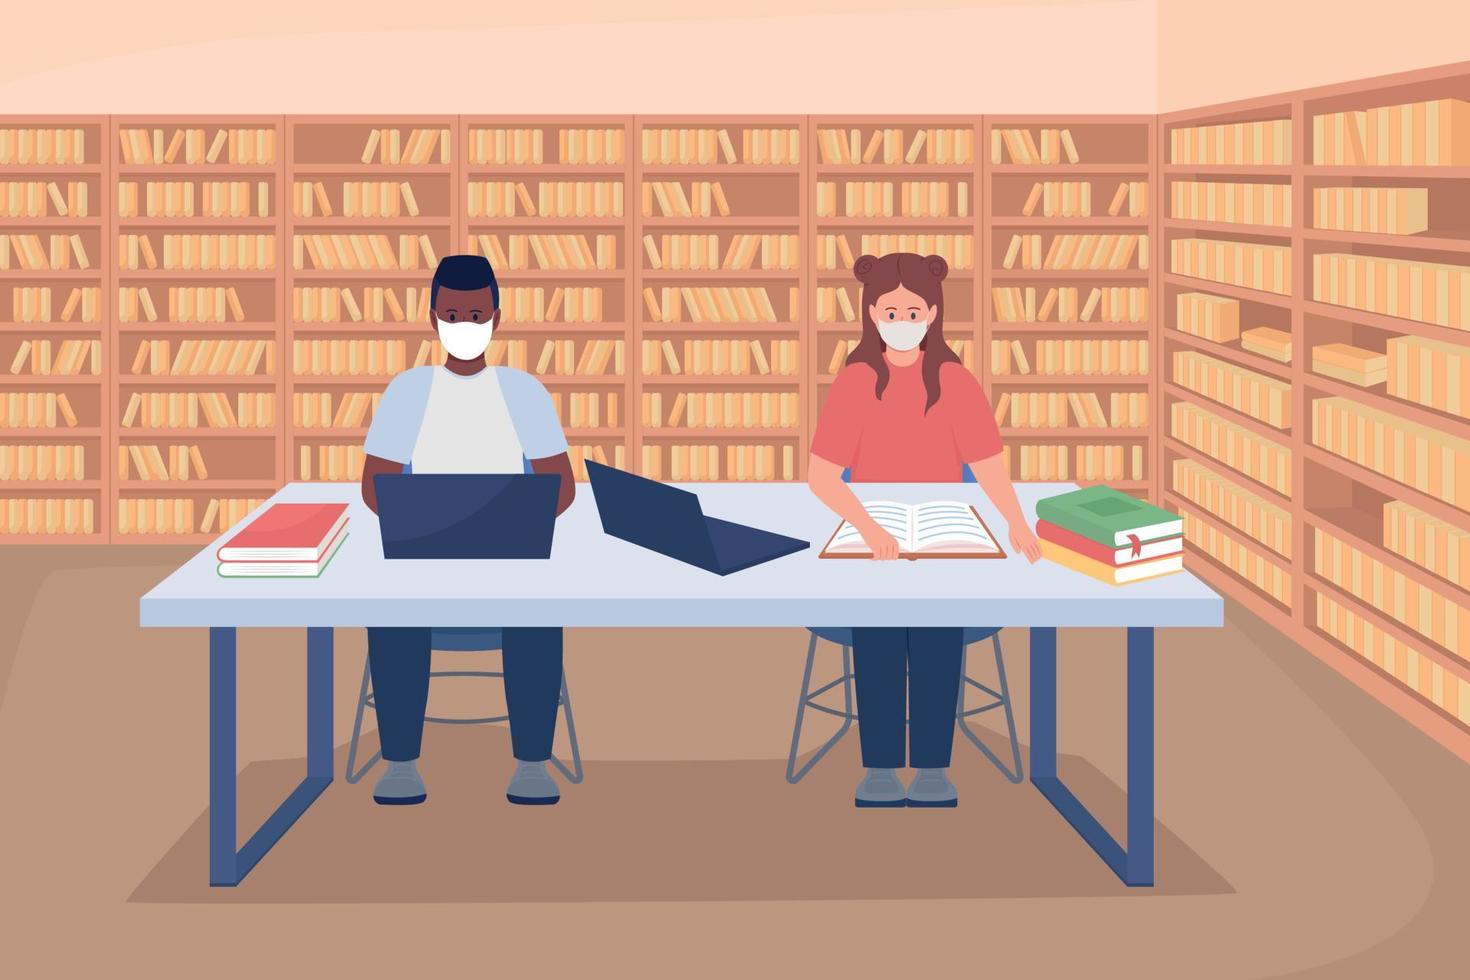 Studying in library flat color vector illustration